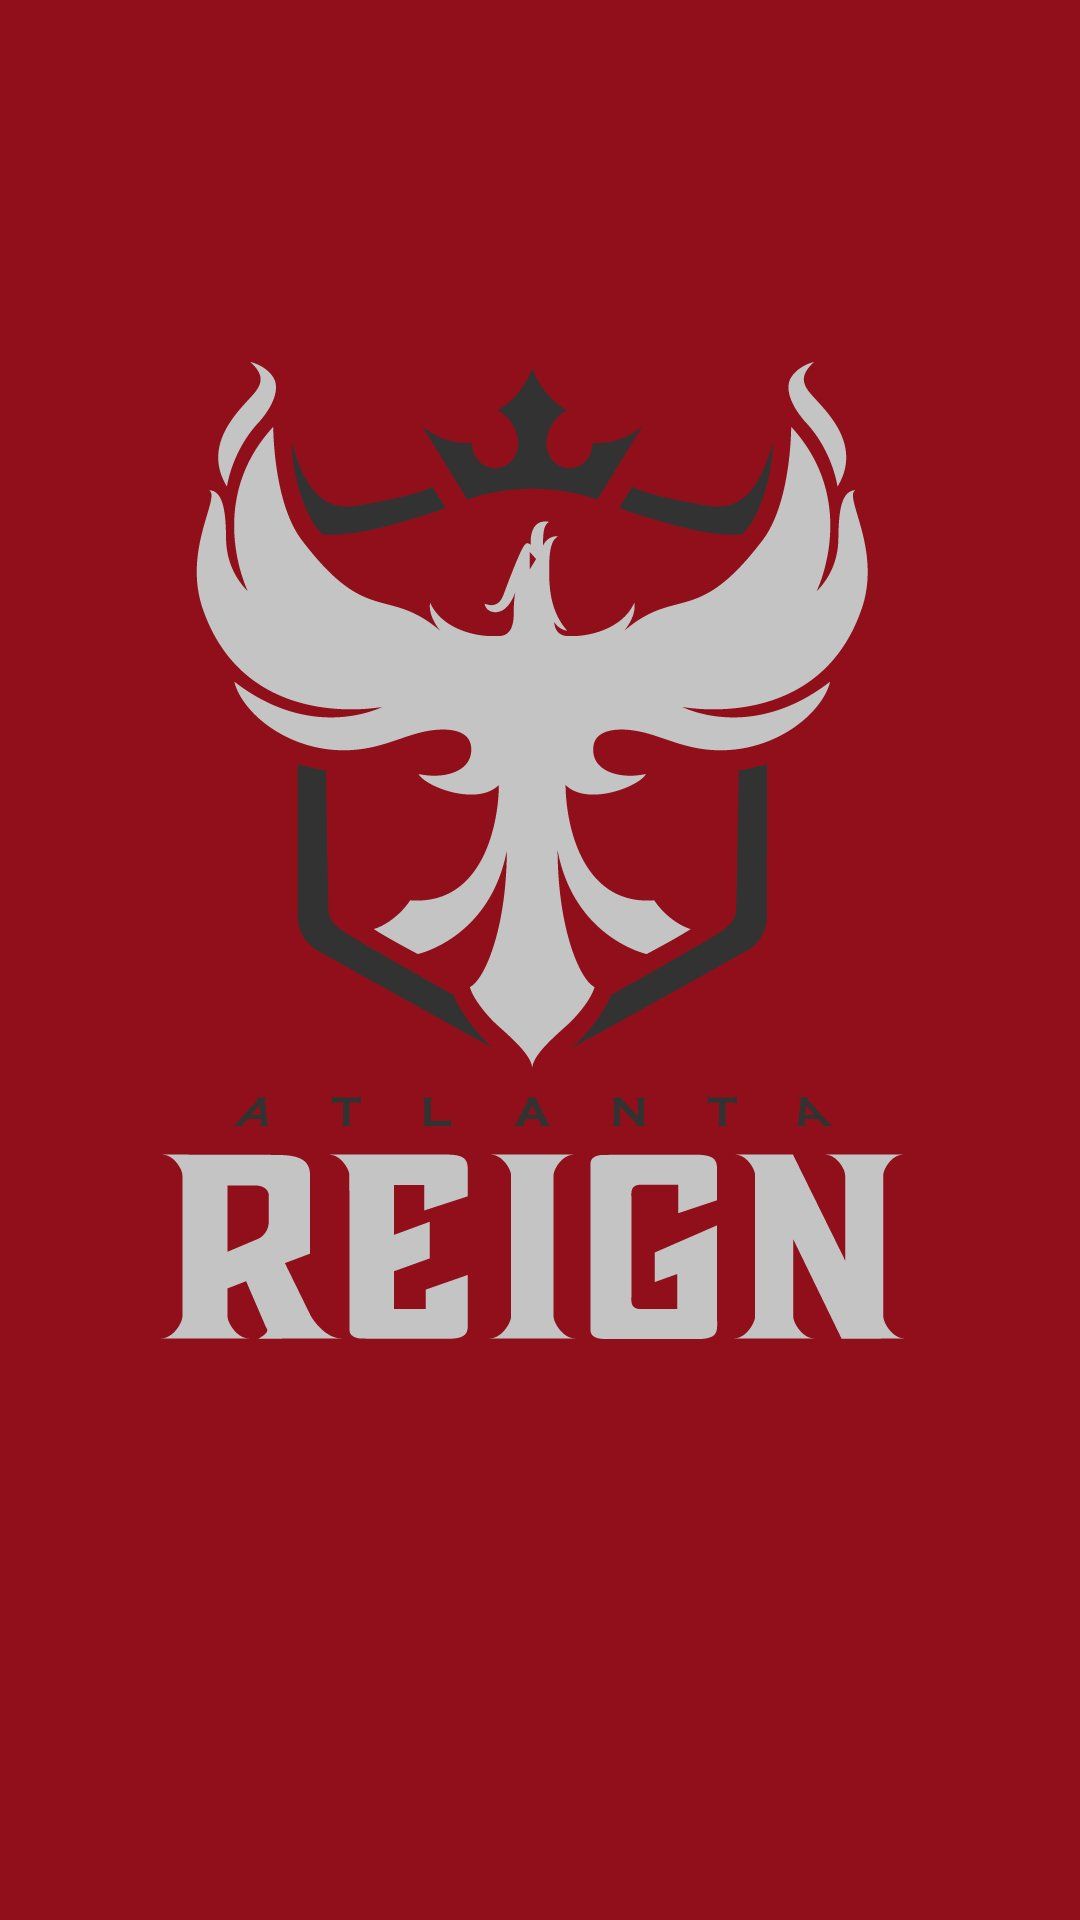 Reign Supreme Wallpapers